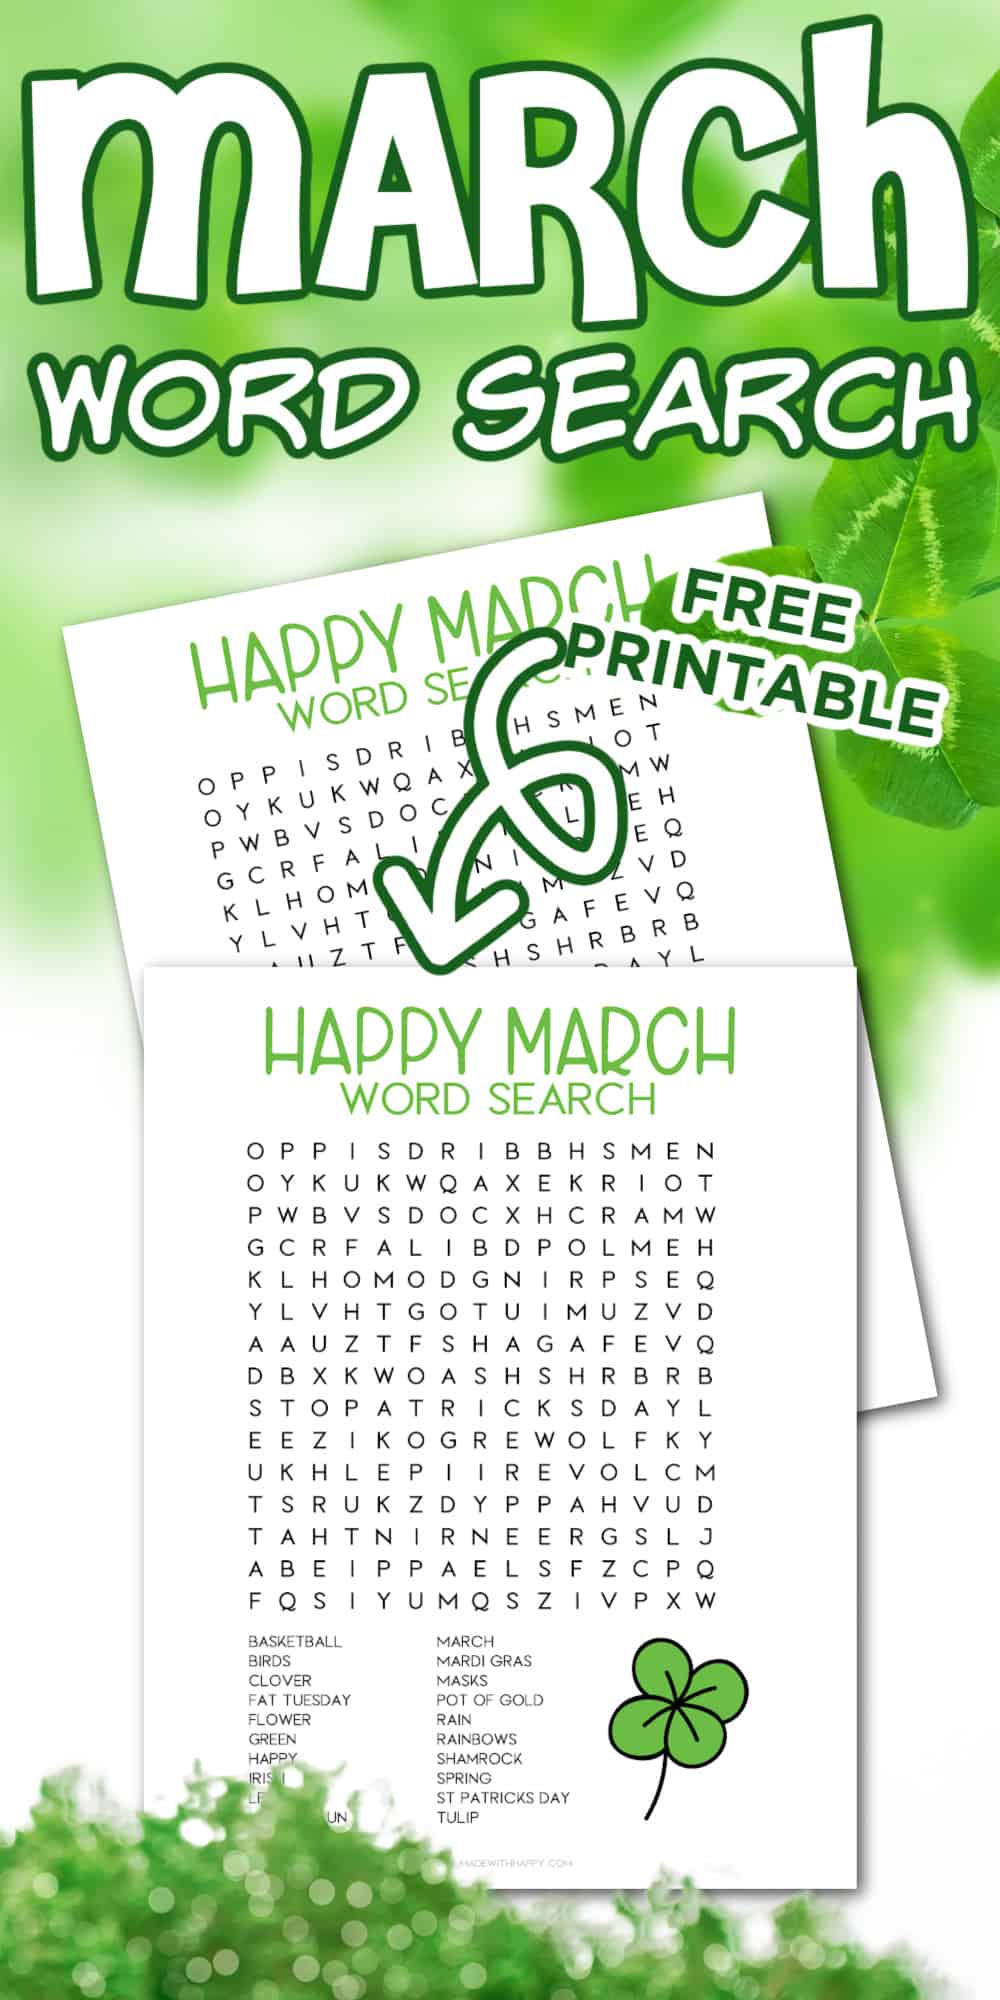 word search for March